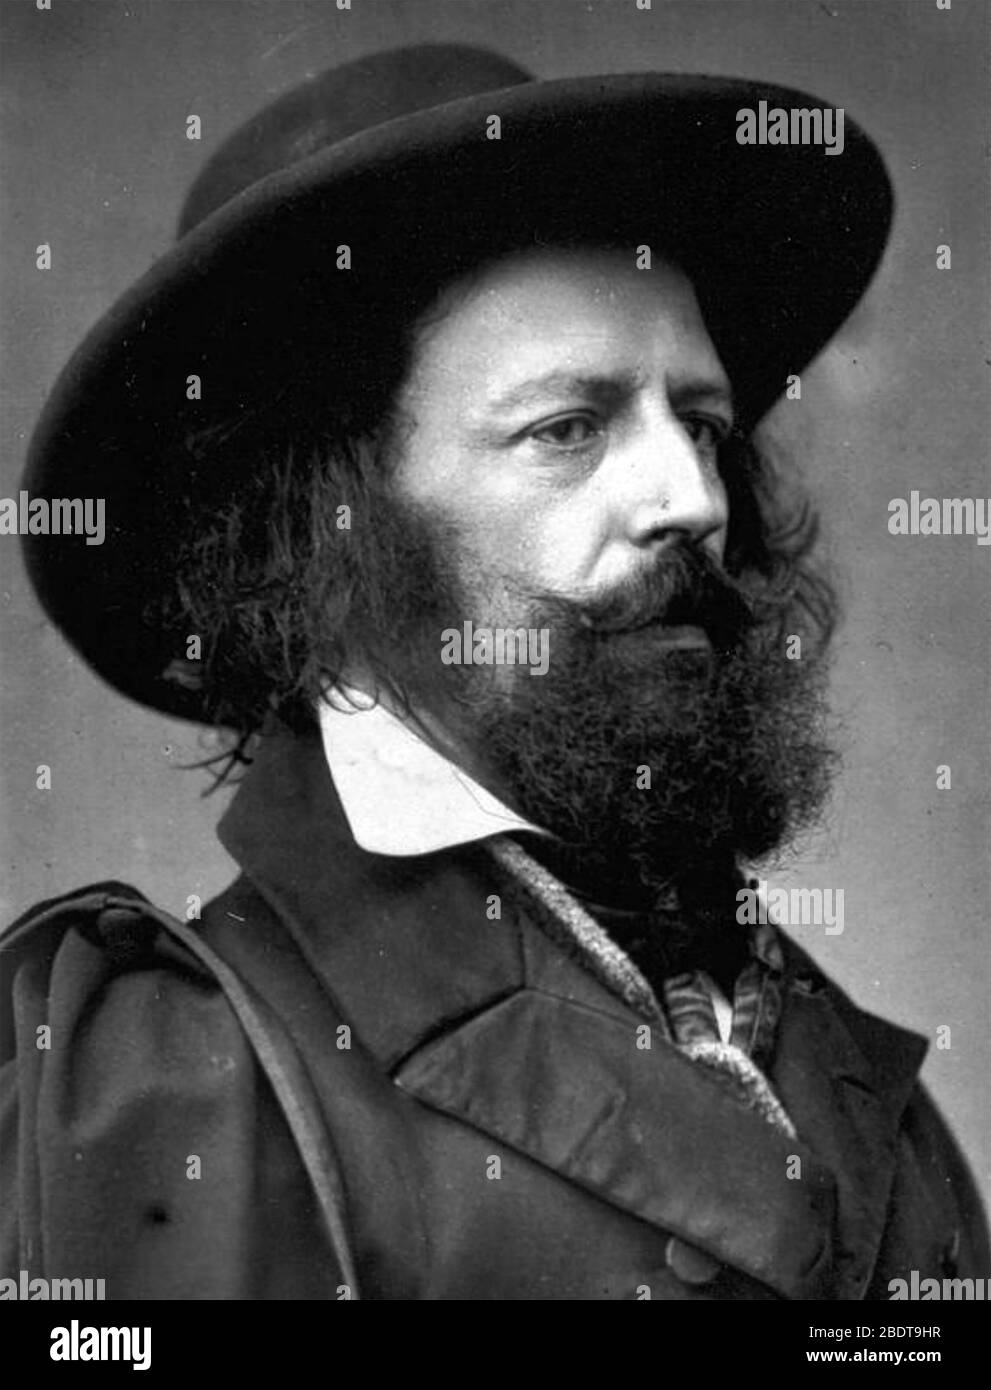 ALFRED,Lord TENNYSON (1809-1892) poète anglais Banque D'Images